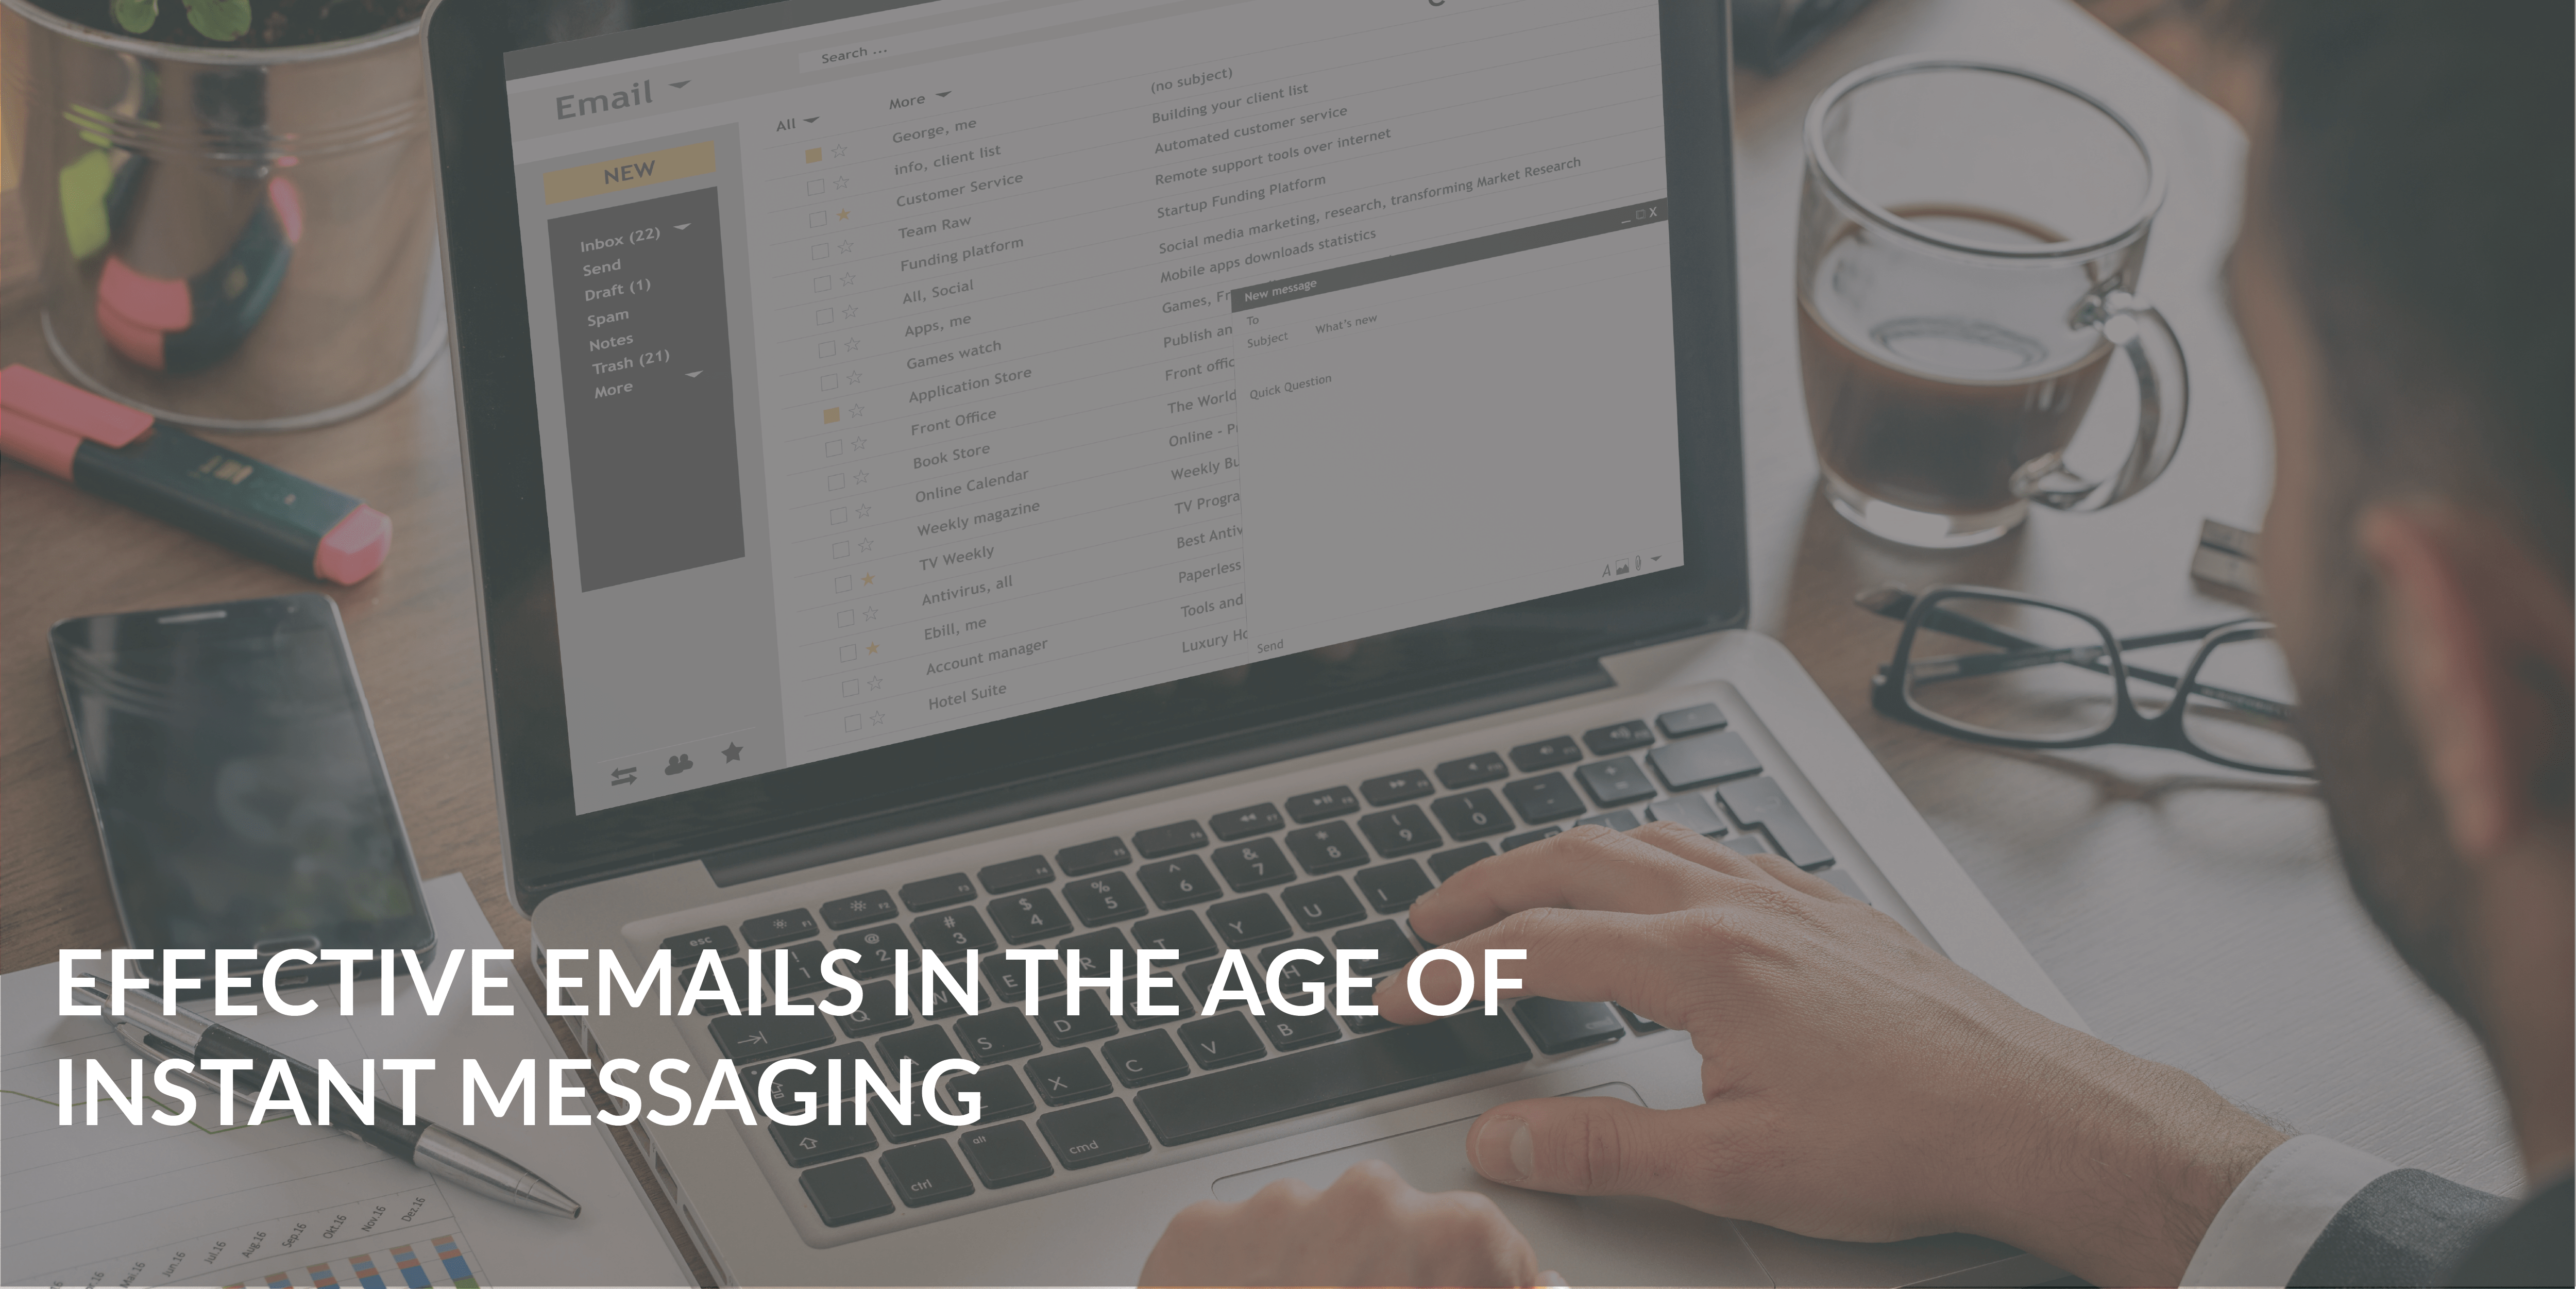 Effective emails in the age of instant messaging